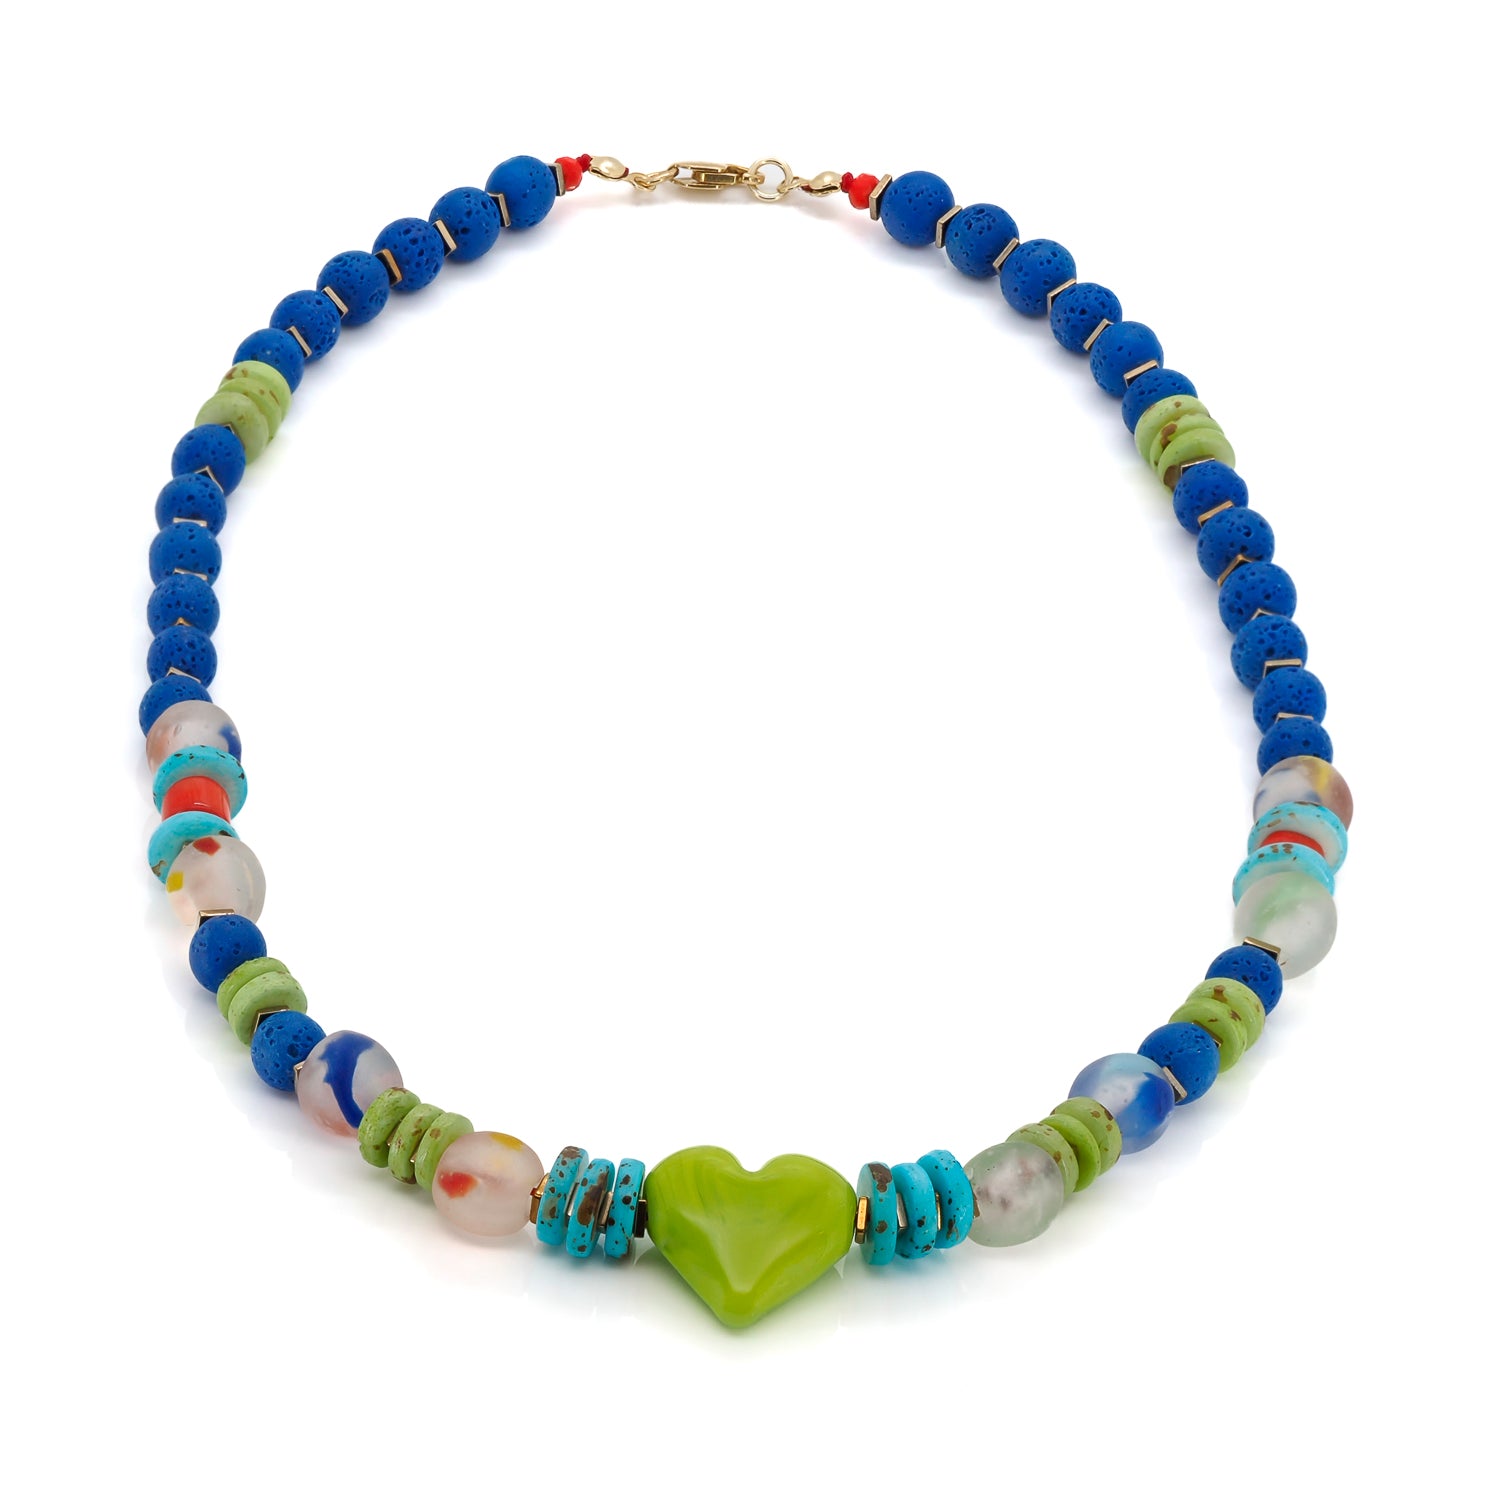 Colorful Flair: Bohemian Beaded Necklace with Ceramic Pendant